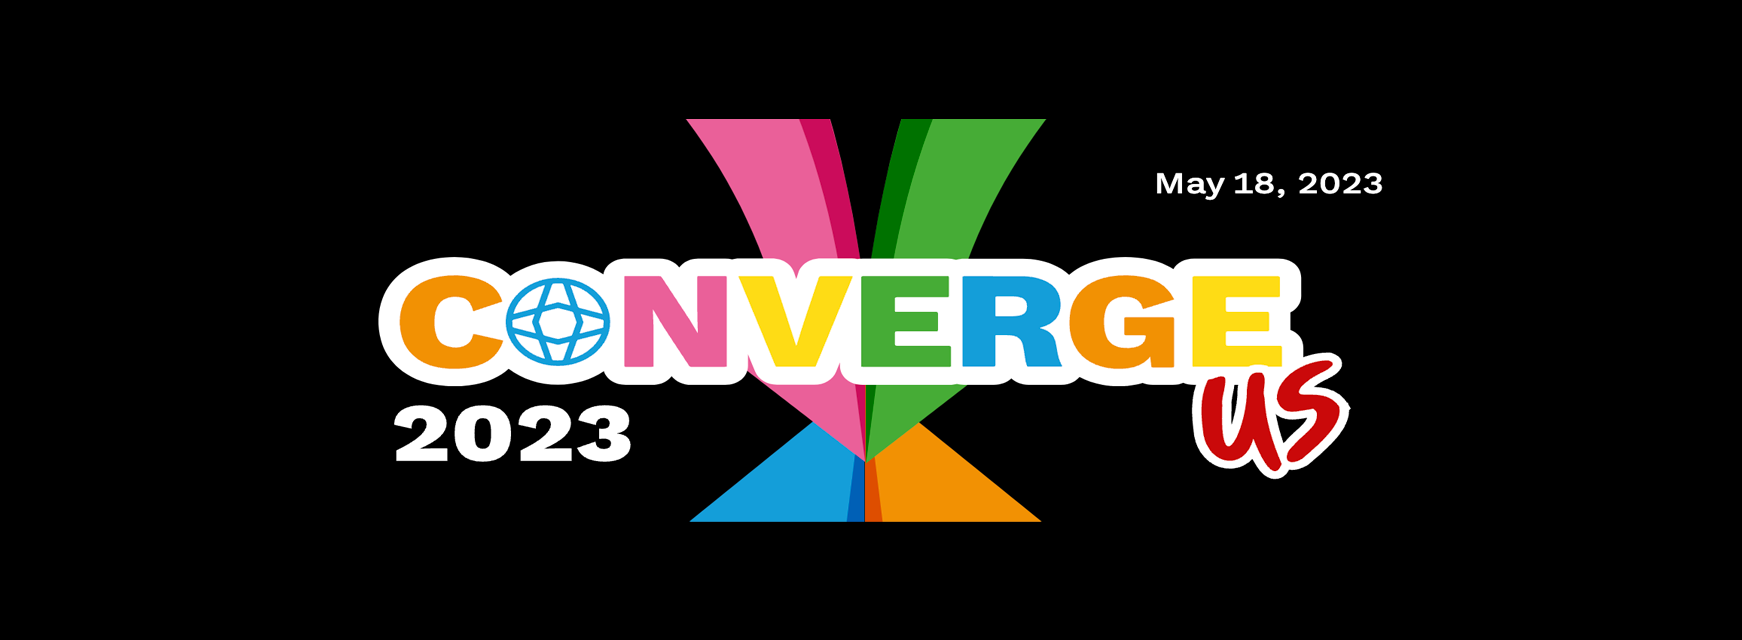 May 18: Converge US Design Systems Conference